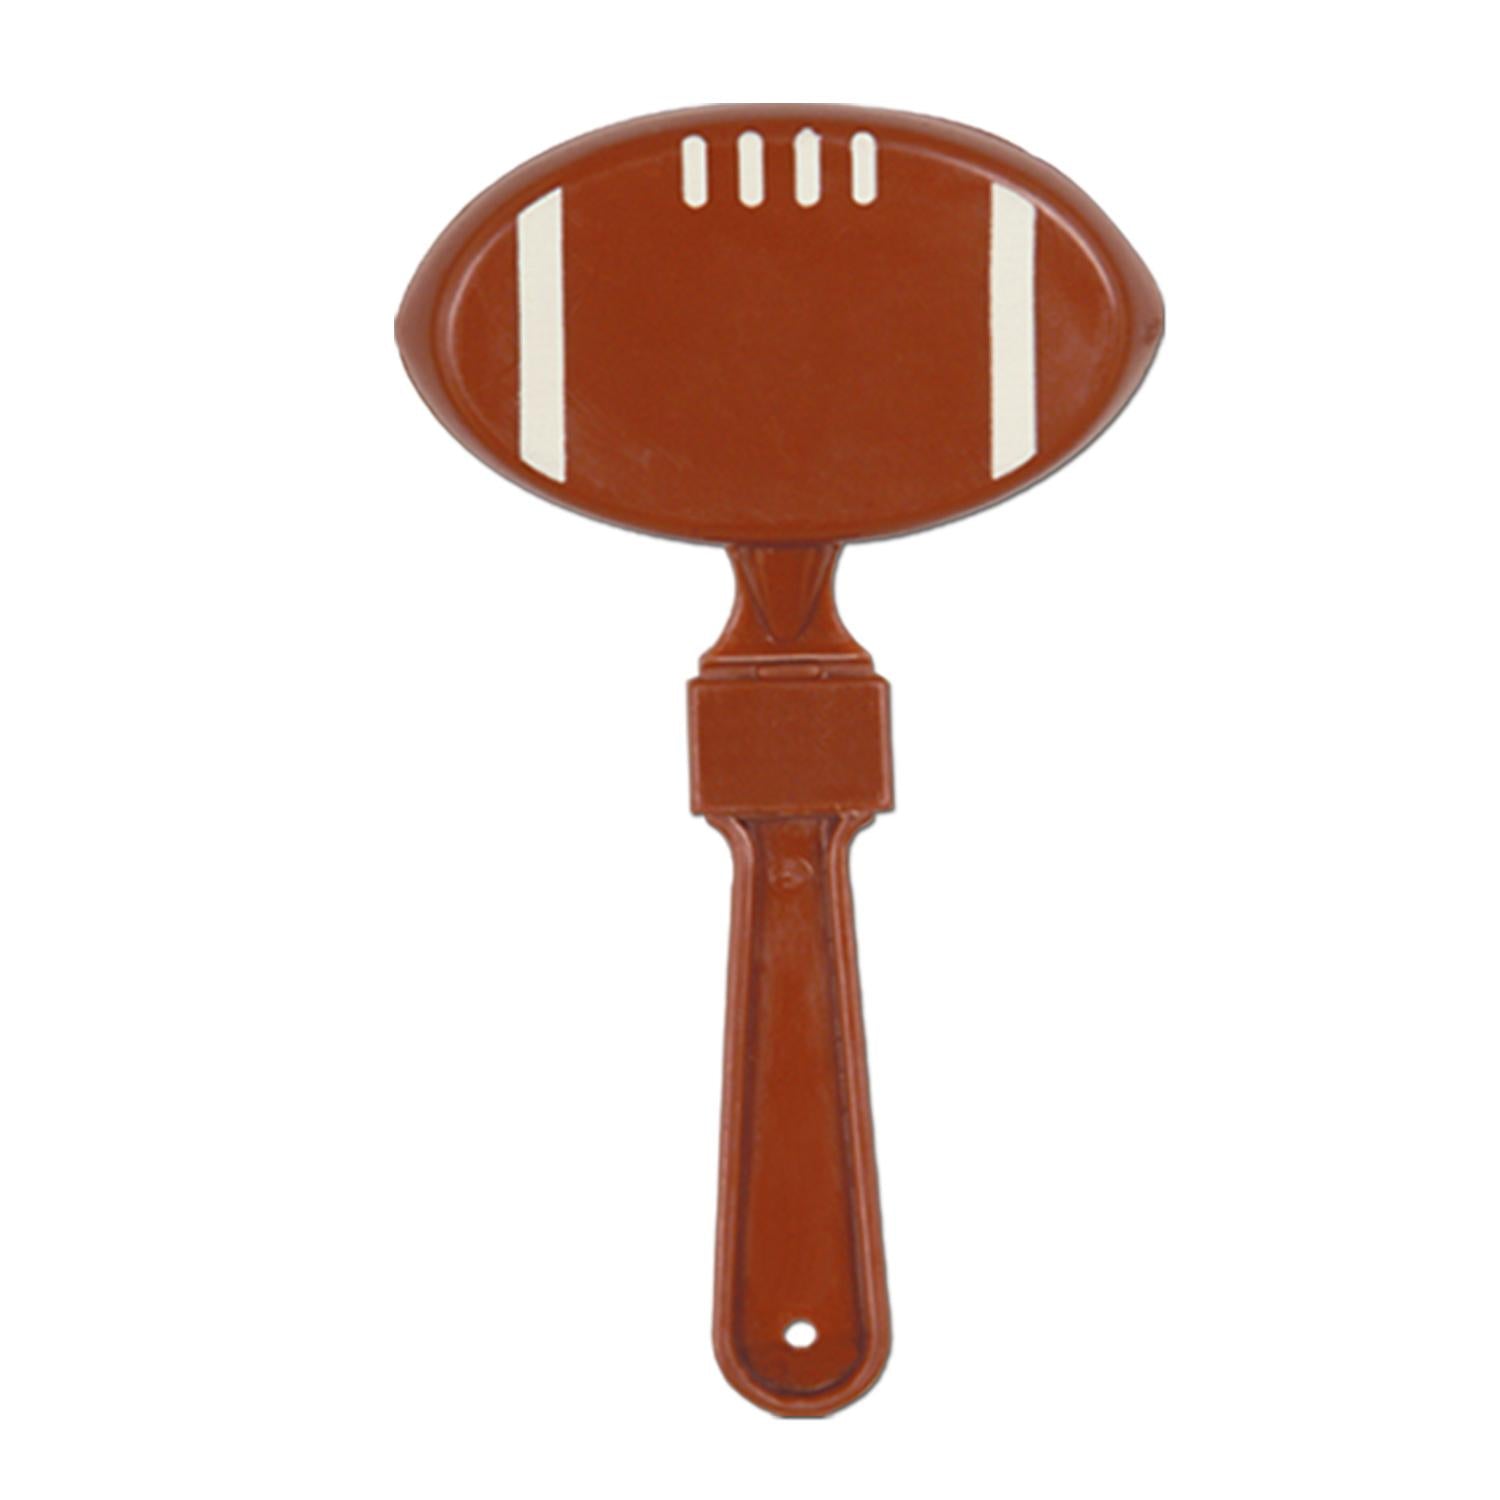 Beistle Football Party Clapper